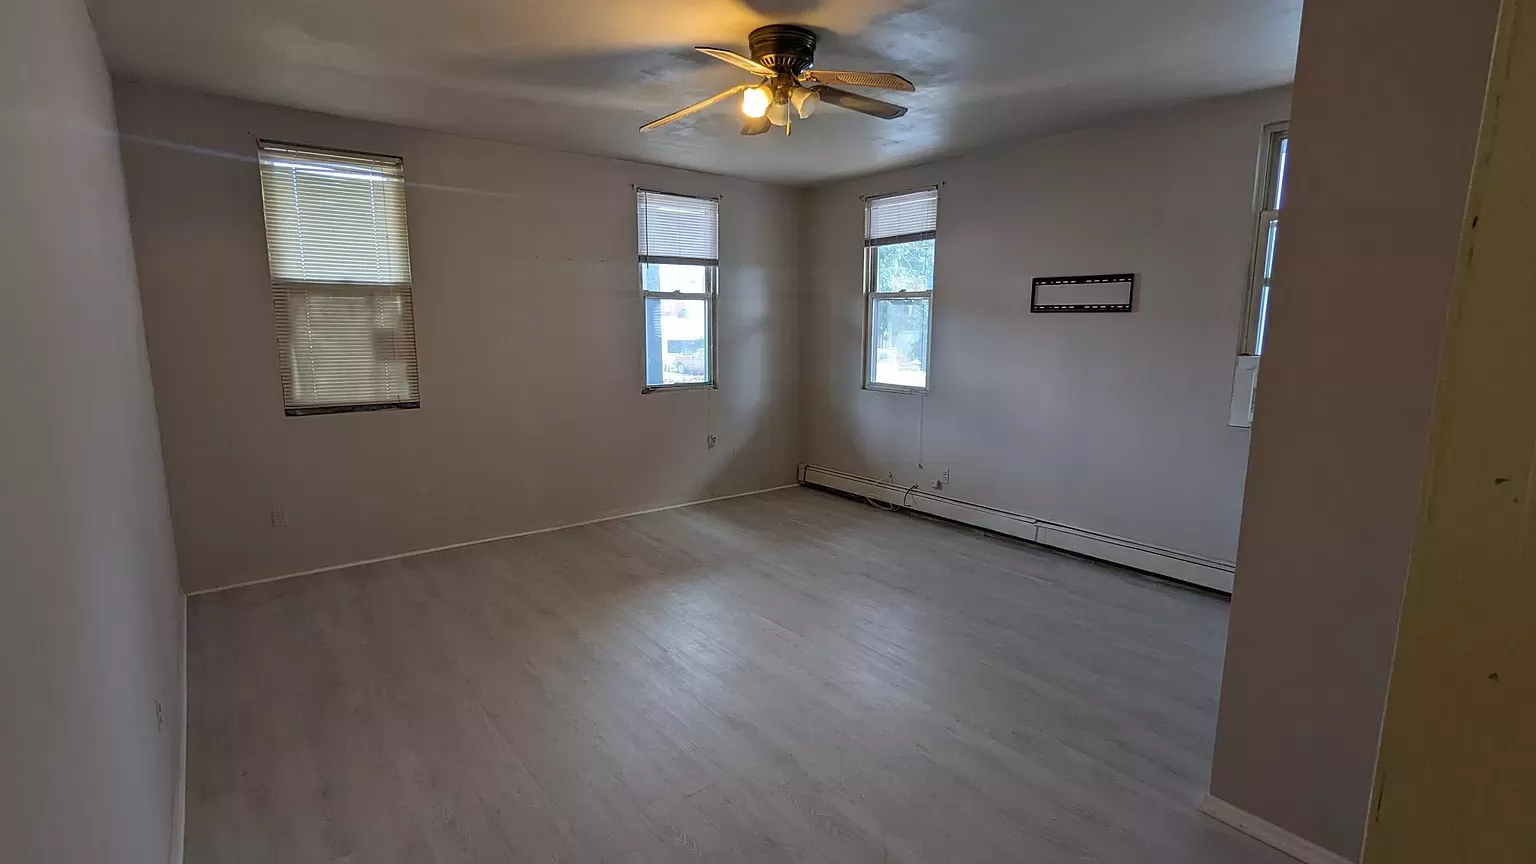 Apartment for Rent in Woodhaven Queens New York